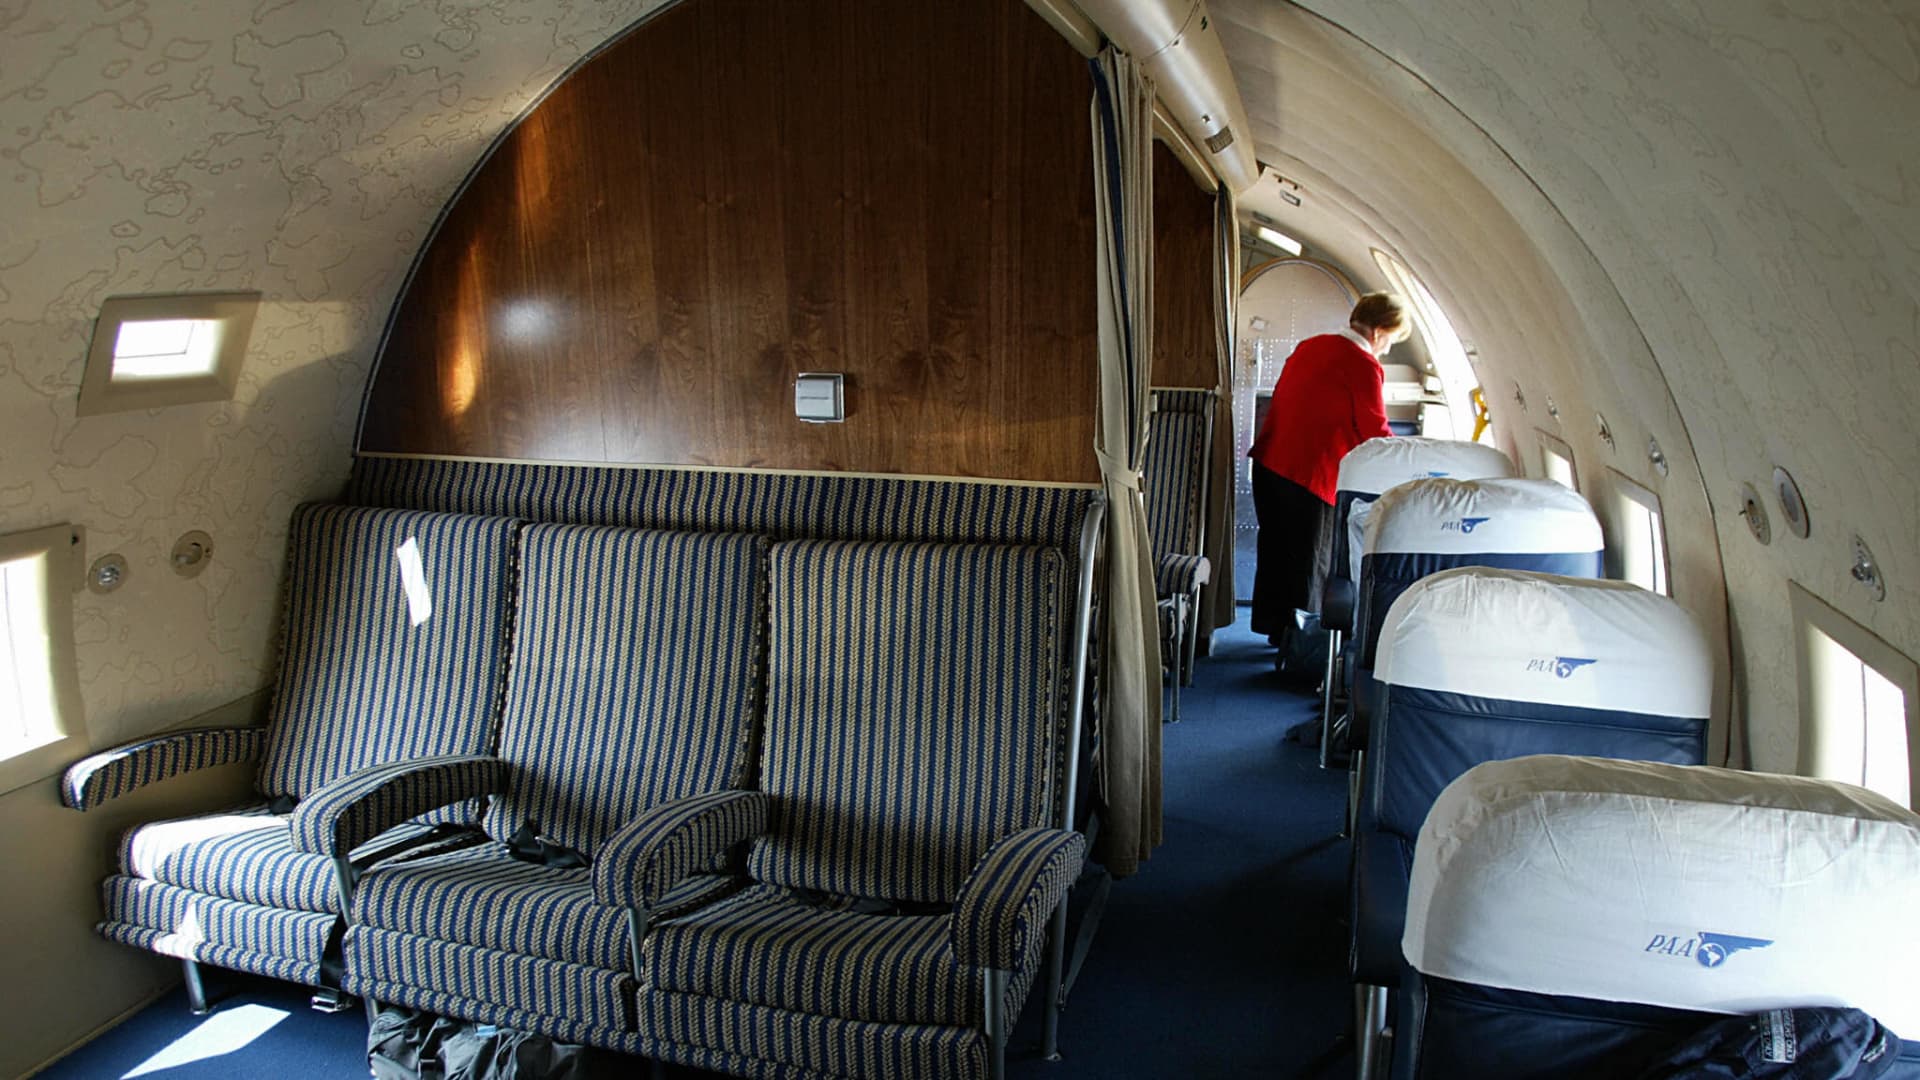 The interior of the sole surviving Boeing 307 Stratoliner, as photographed in August of 2003.